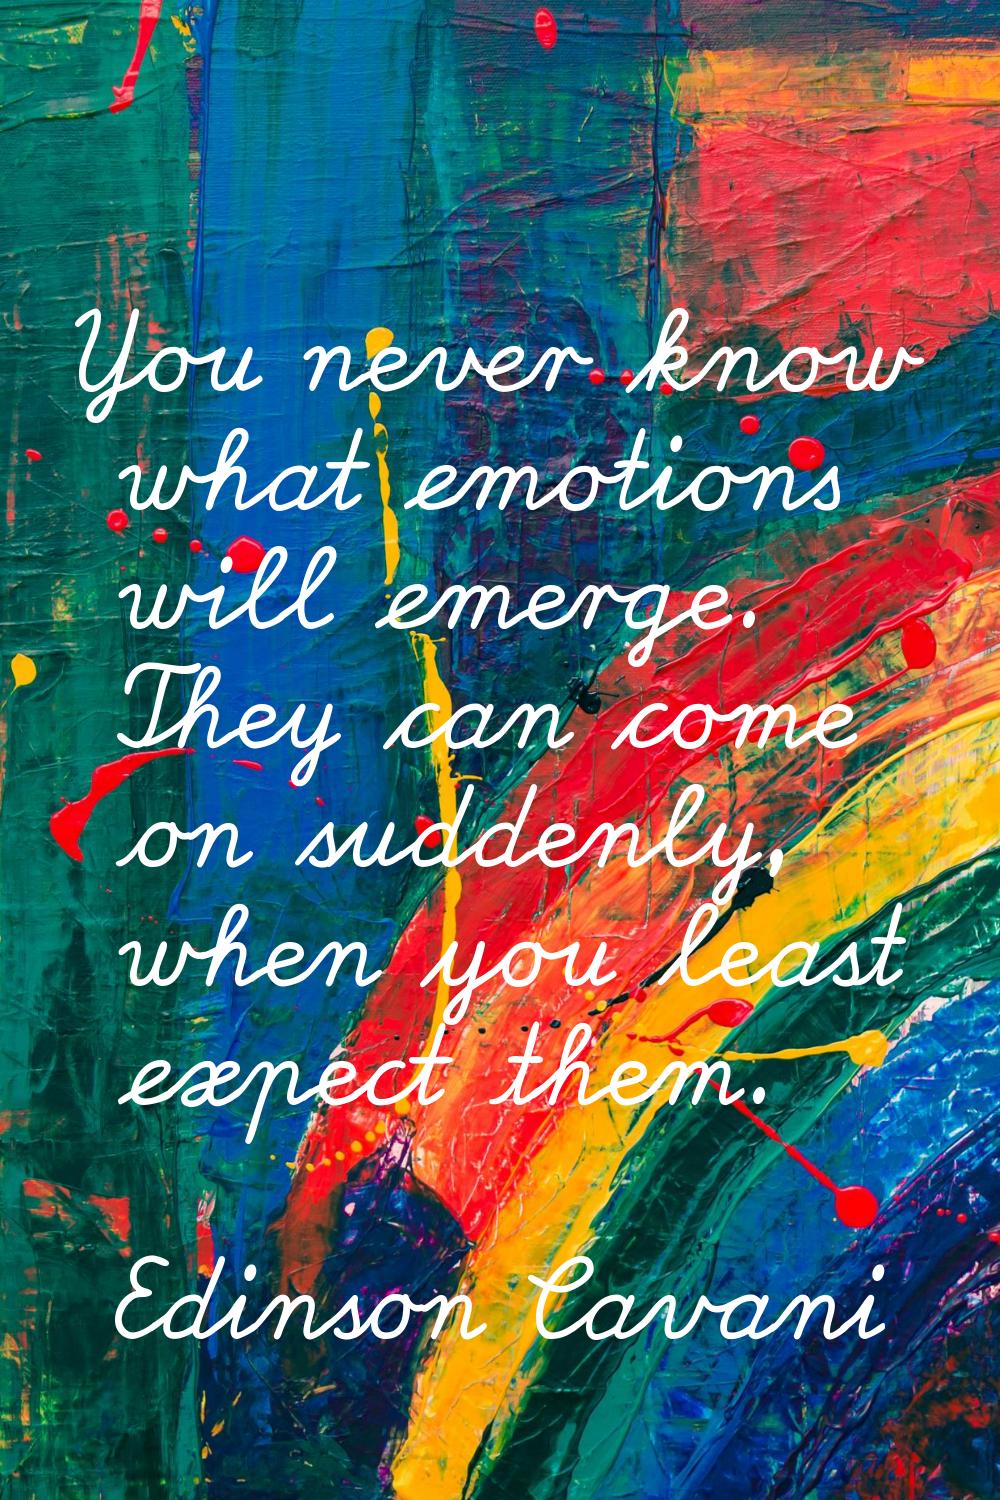 You never know what emotions will emerge. They can come on suddenly, when you least expect them.